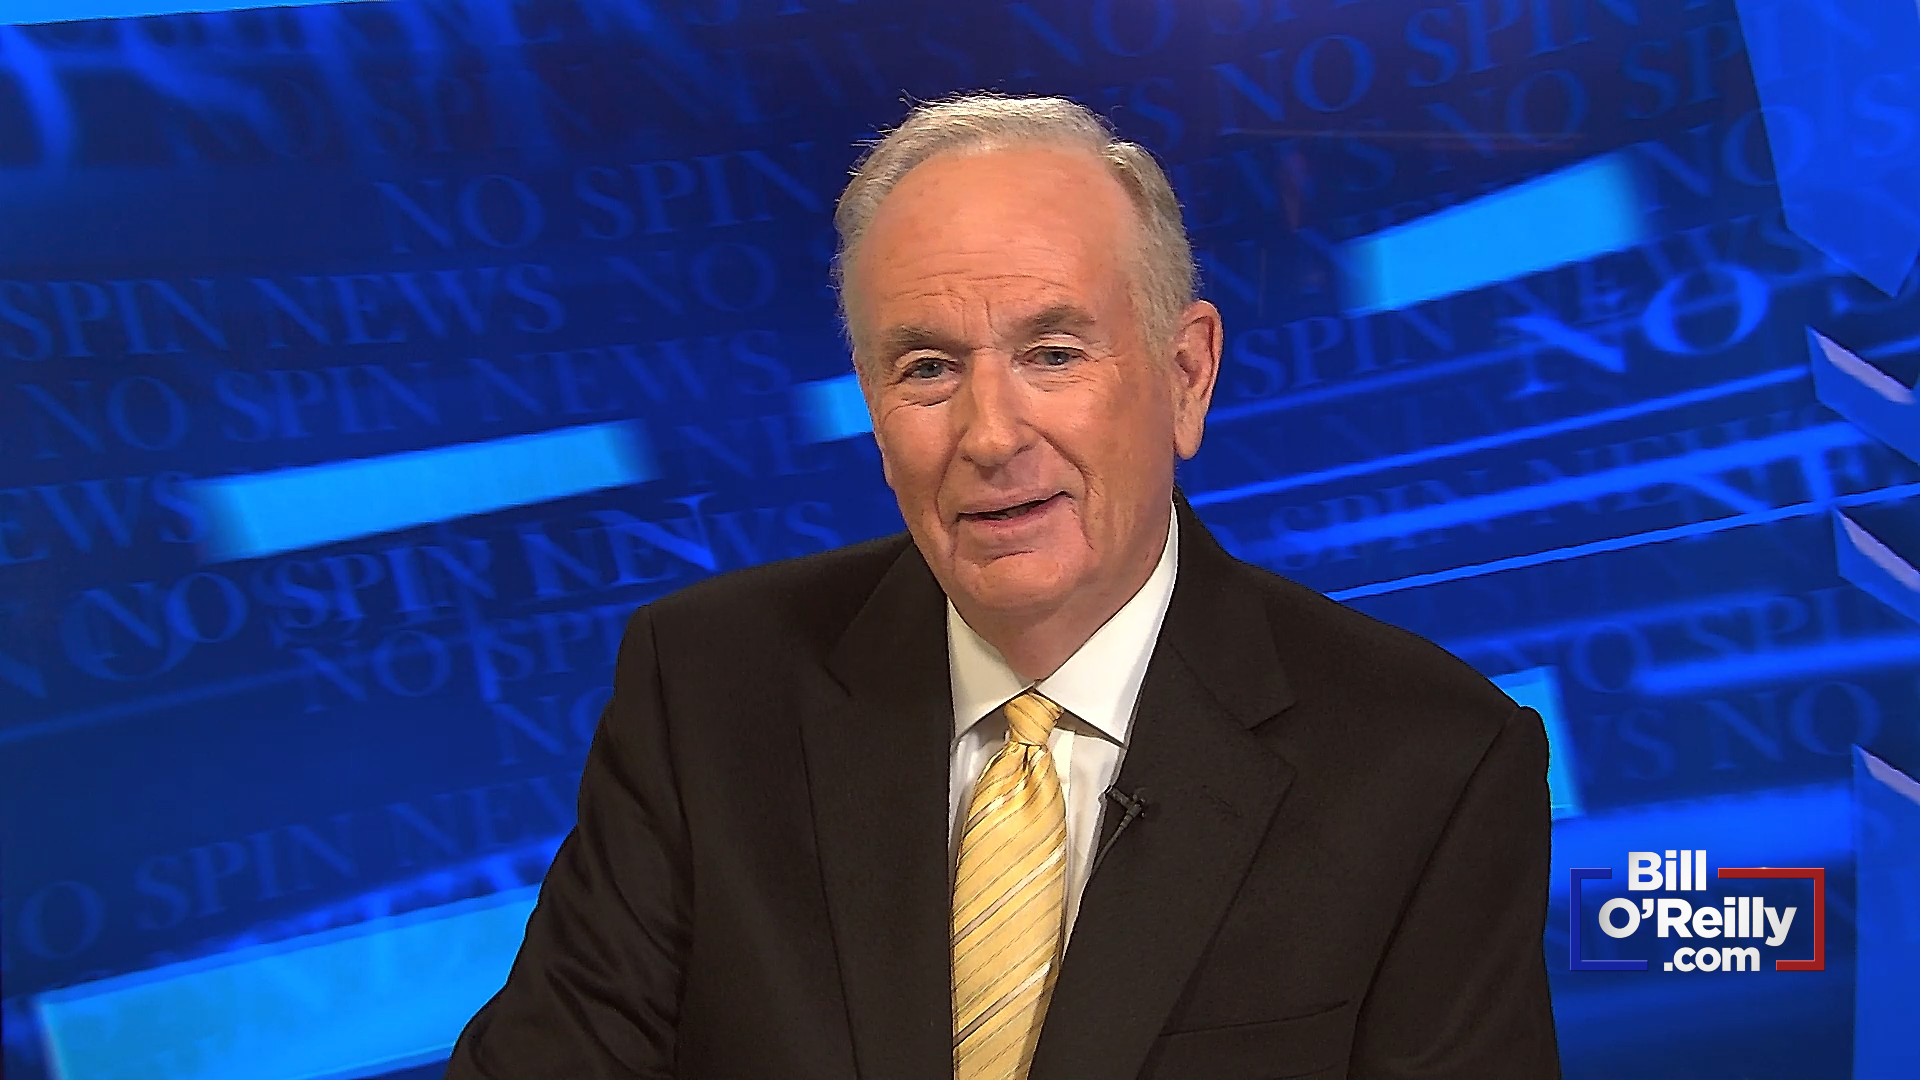 O'Reilly Rips Brian Williams: 'You're a Phony!'